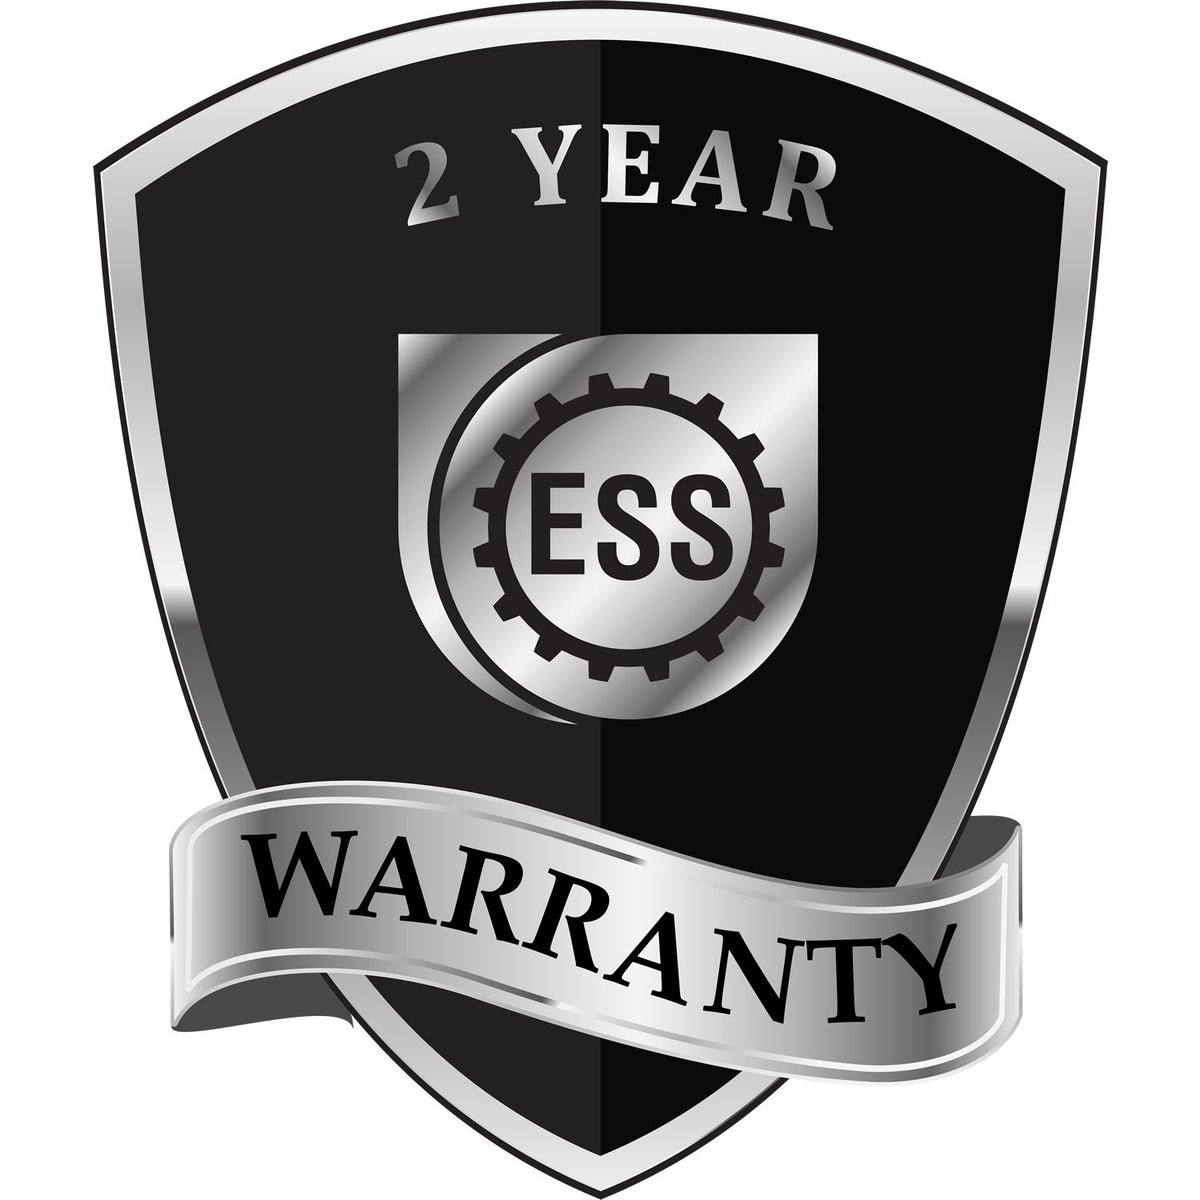 A black and silver badge or emblem showing warranty information for the Hybrid Maine Geologist Seal